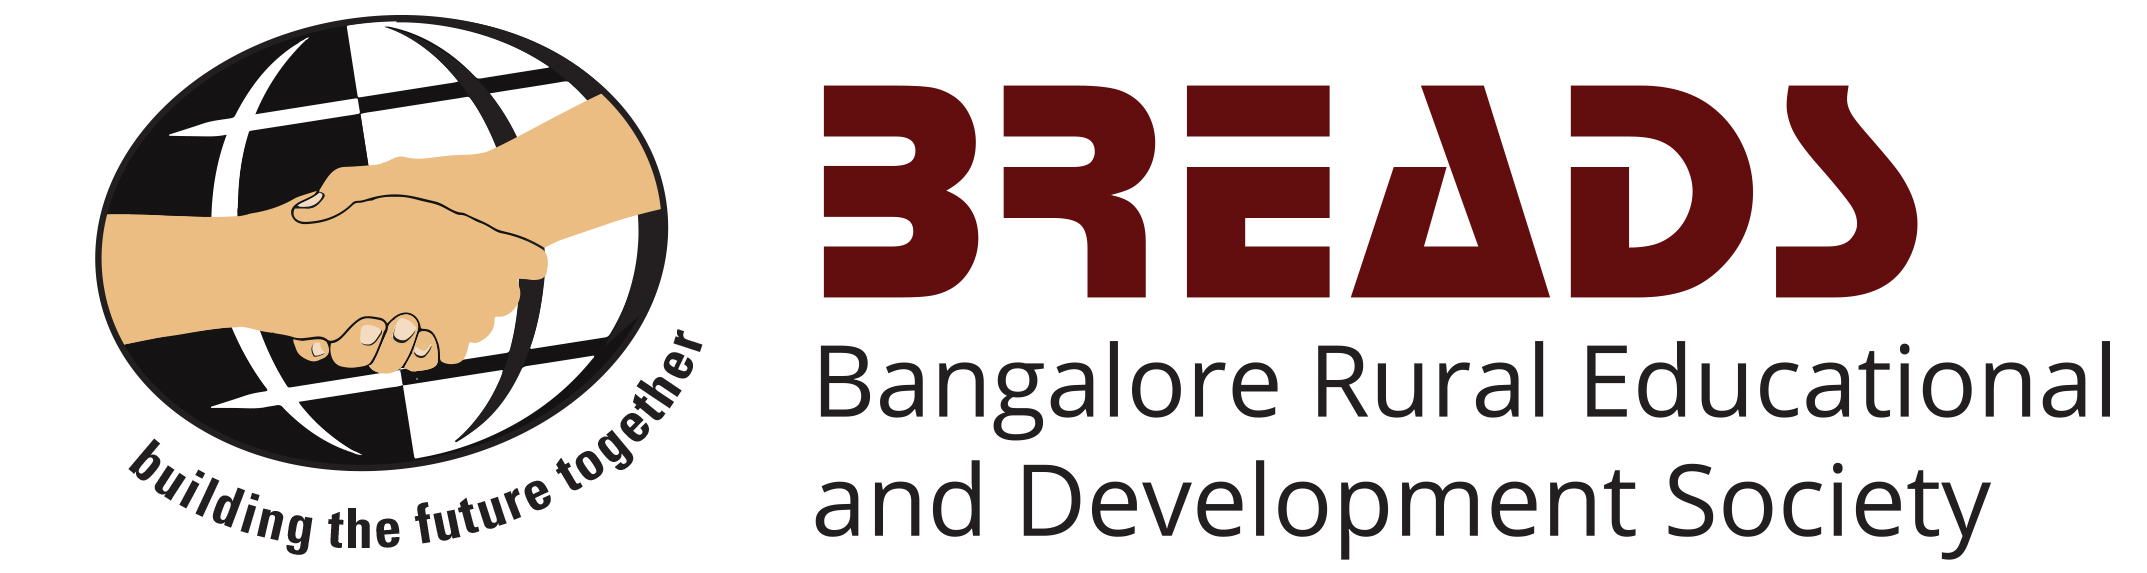 Bangalore Rural Educational And Development Society (BREADS) logo